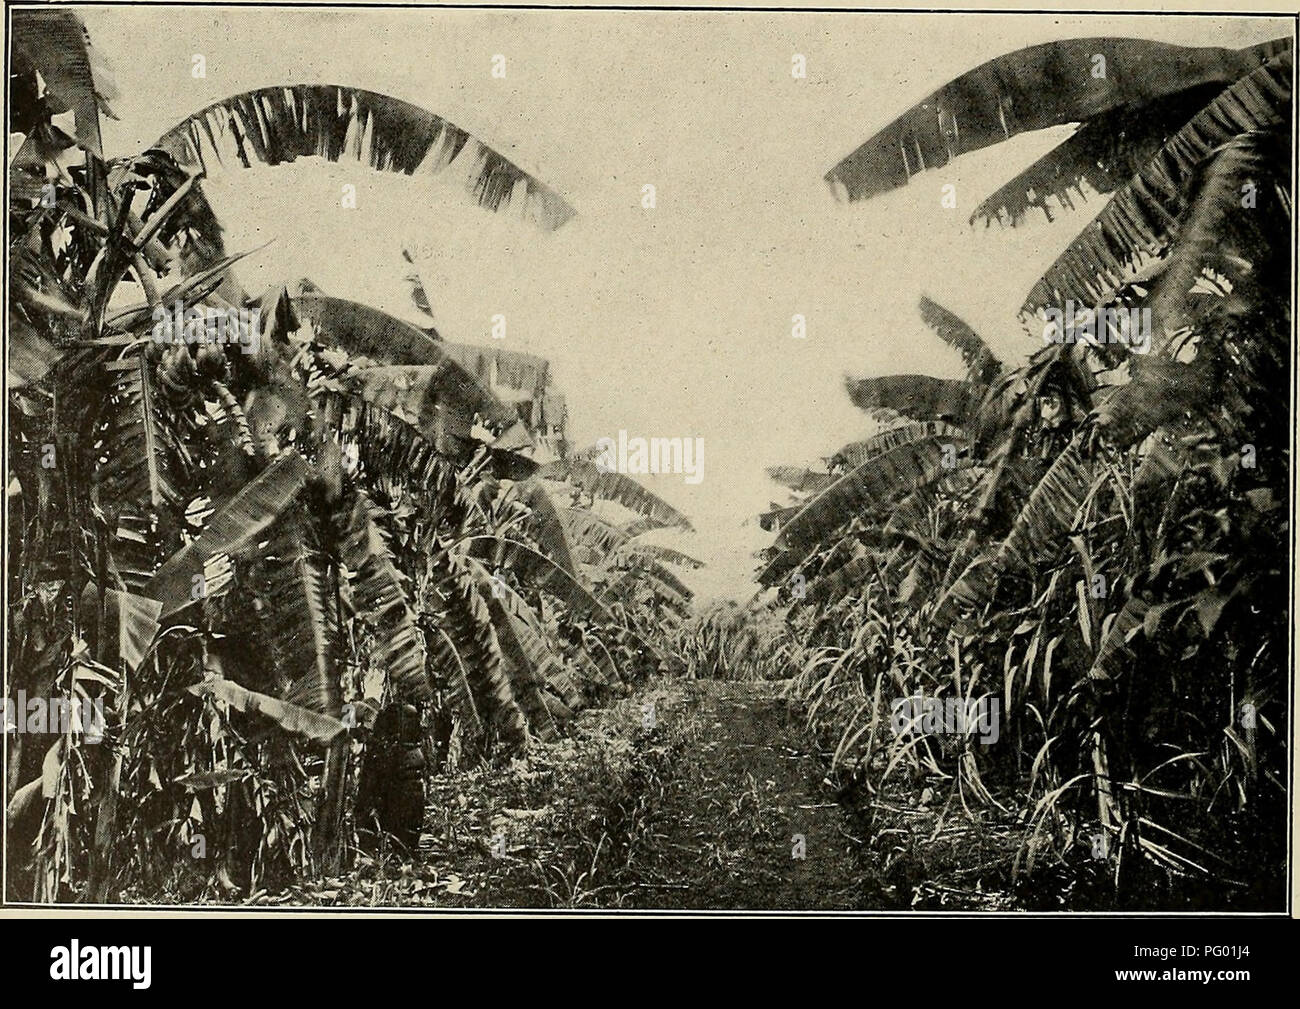 . The Cuba review. 20 THE CUBA REVIEW. BANANA CULTURE IN CUBA. Soil Requirements—Liberal Water Supply Essential—Preparing the Land—Planting and Pruning Directions—The Best Varieties for Home and Export. —Poor Carrjdng Quality of Cuban Grown Bananas. BY C. F. AUSTIN, • Chief of Department of Horticulture, of the Bstacion Central Agronomica, Cuba. The banana (musa sapientum Linn., chiefly) is one of our very valuable tropical plants, being cultivated for its fruit, its fiber, and for ornamental uses. The fruiting species seldom produce seed, and are propagated by suckers which grow from the base Stock Photo